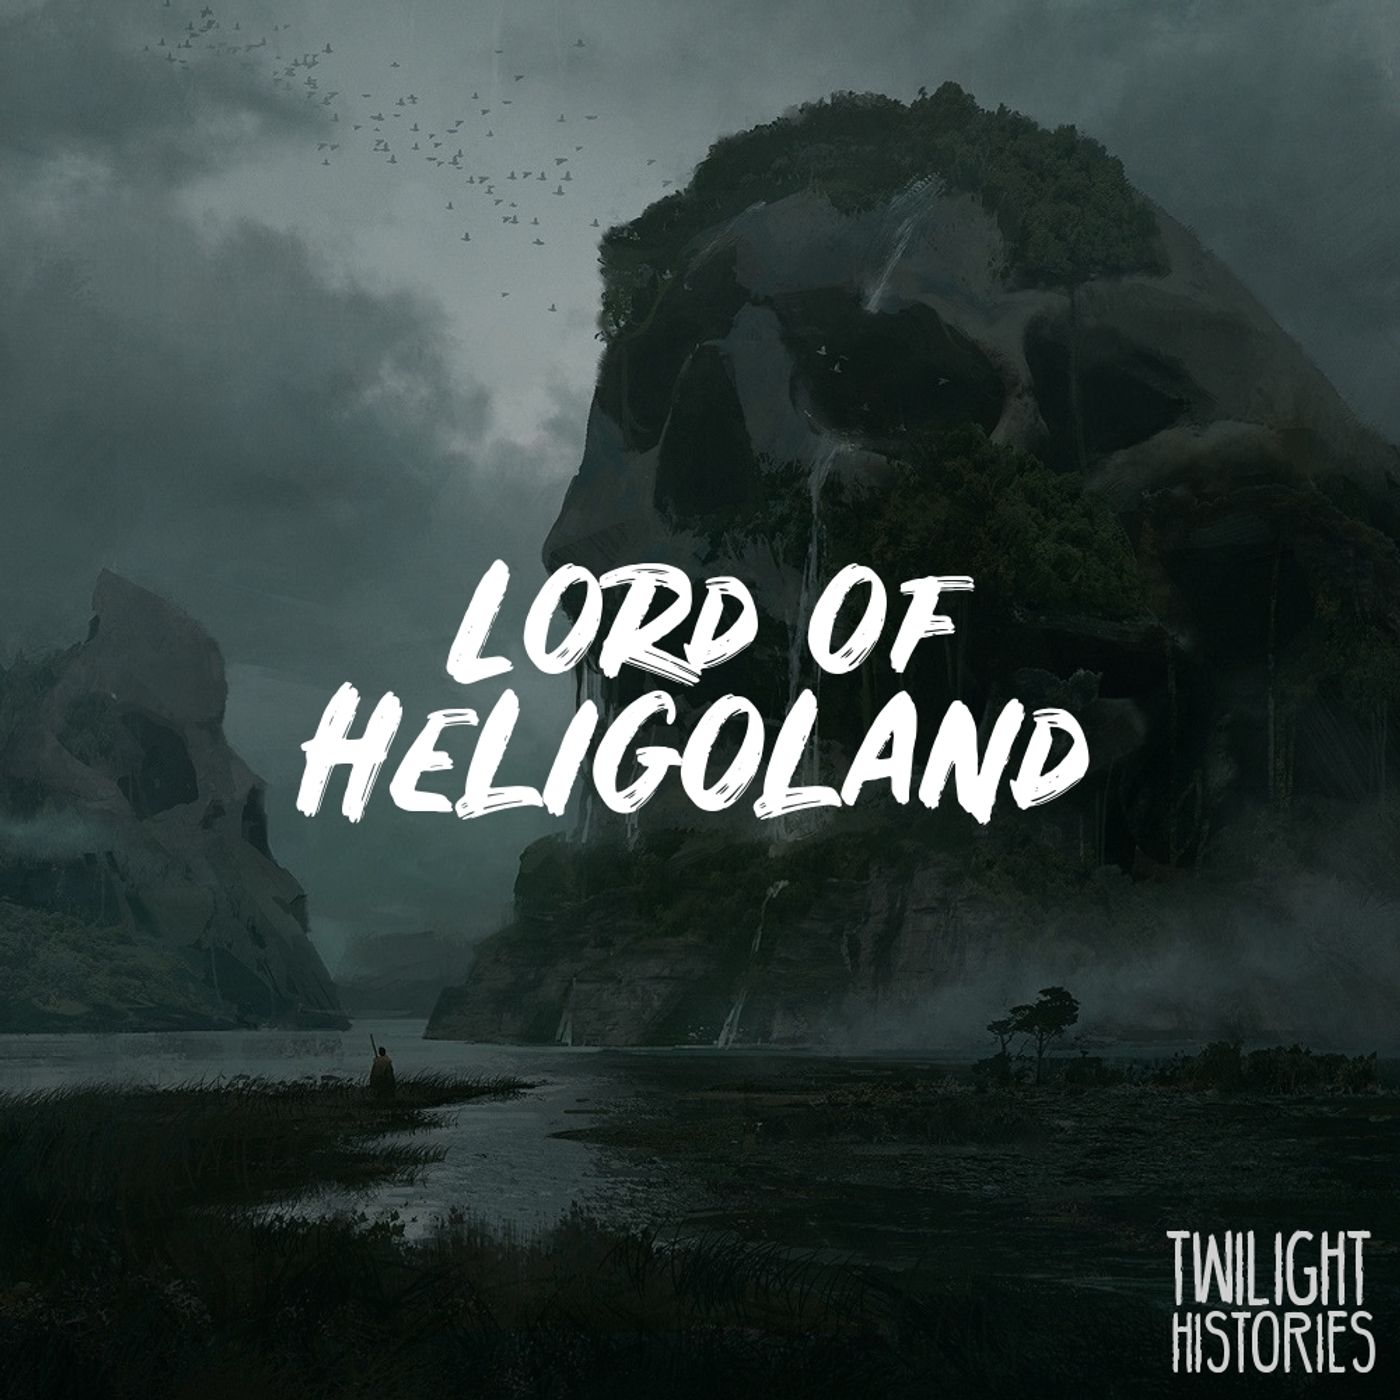 Lord of Heligoland